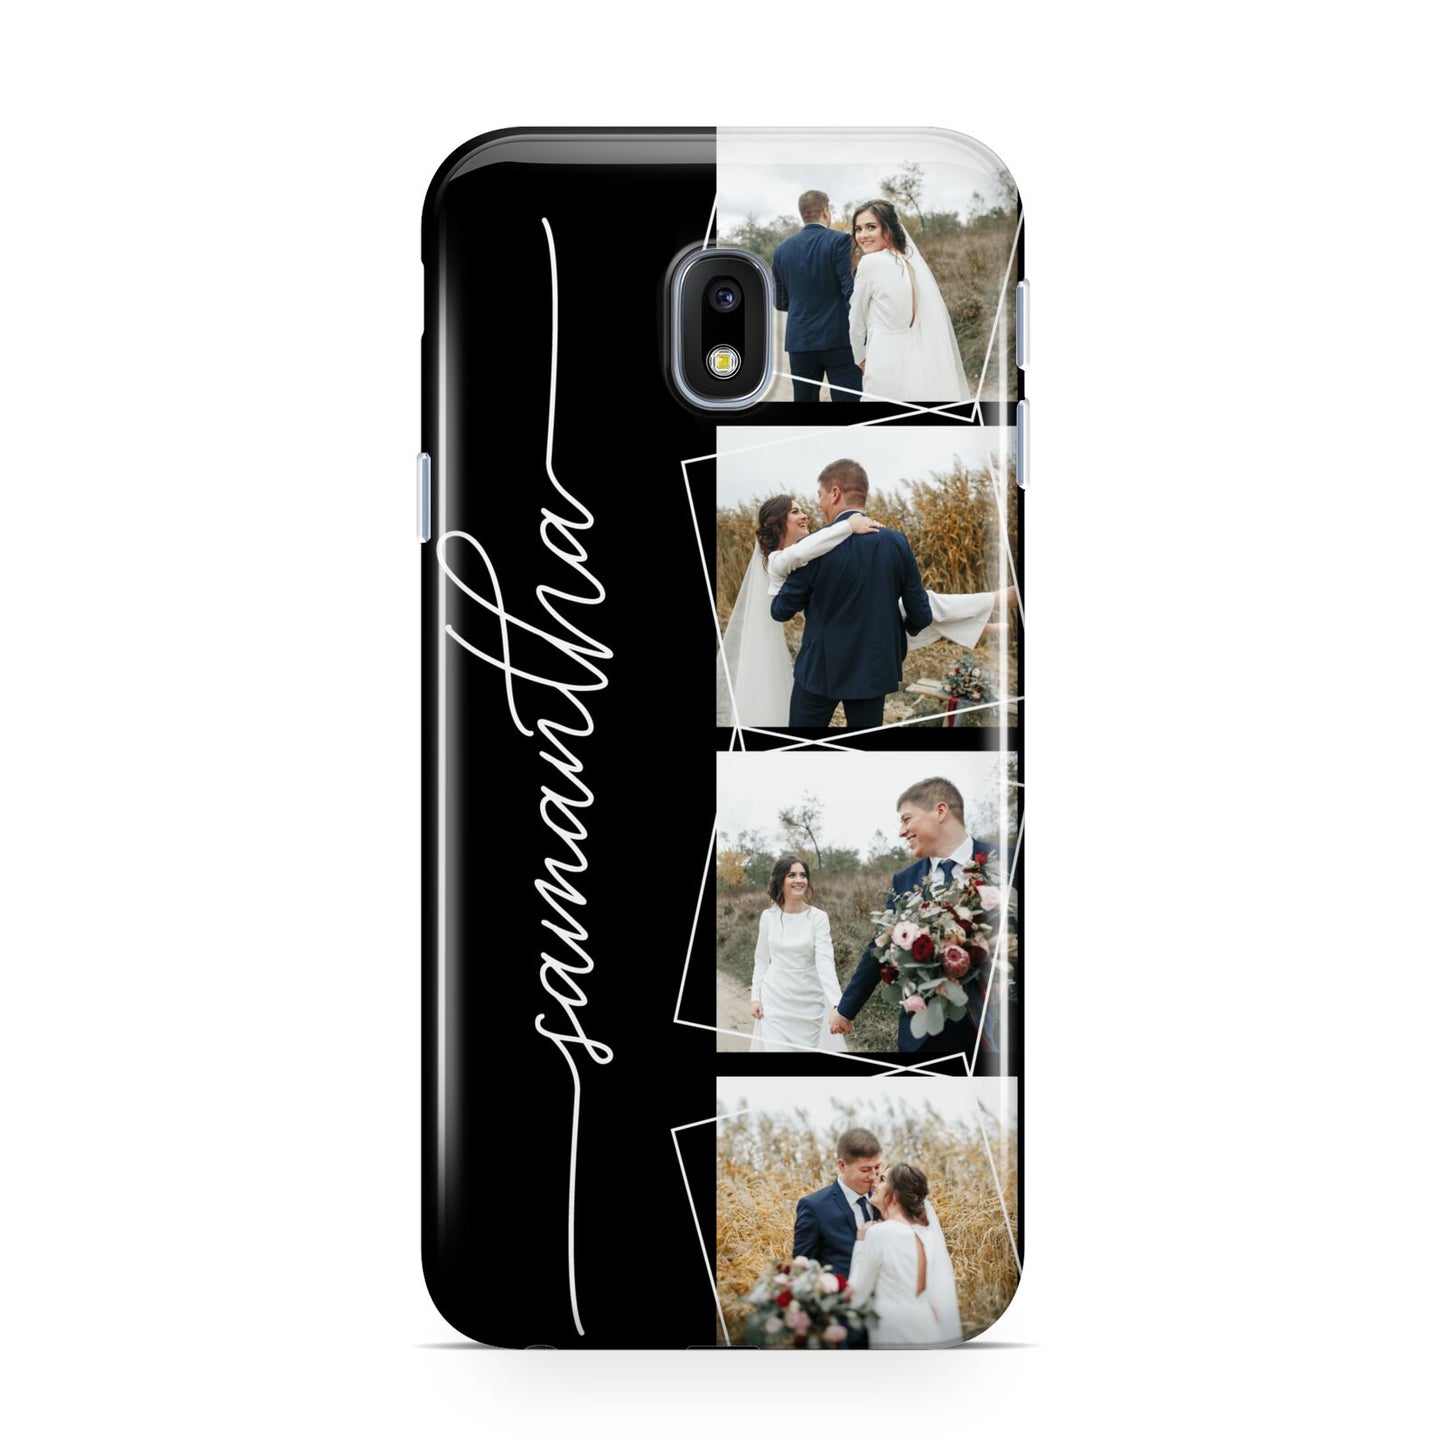 Personalised 4 Photo Couple Name Samsung Galaxy J3 2017 Case